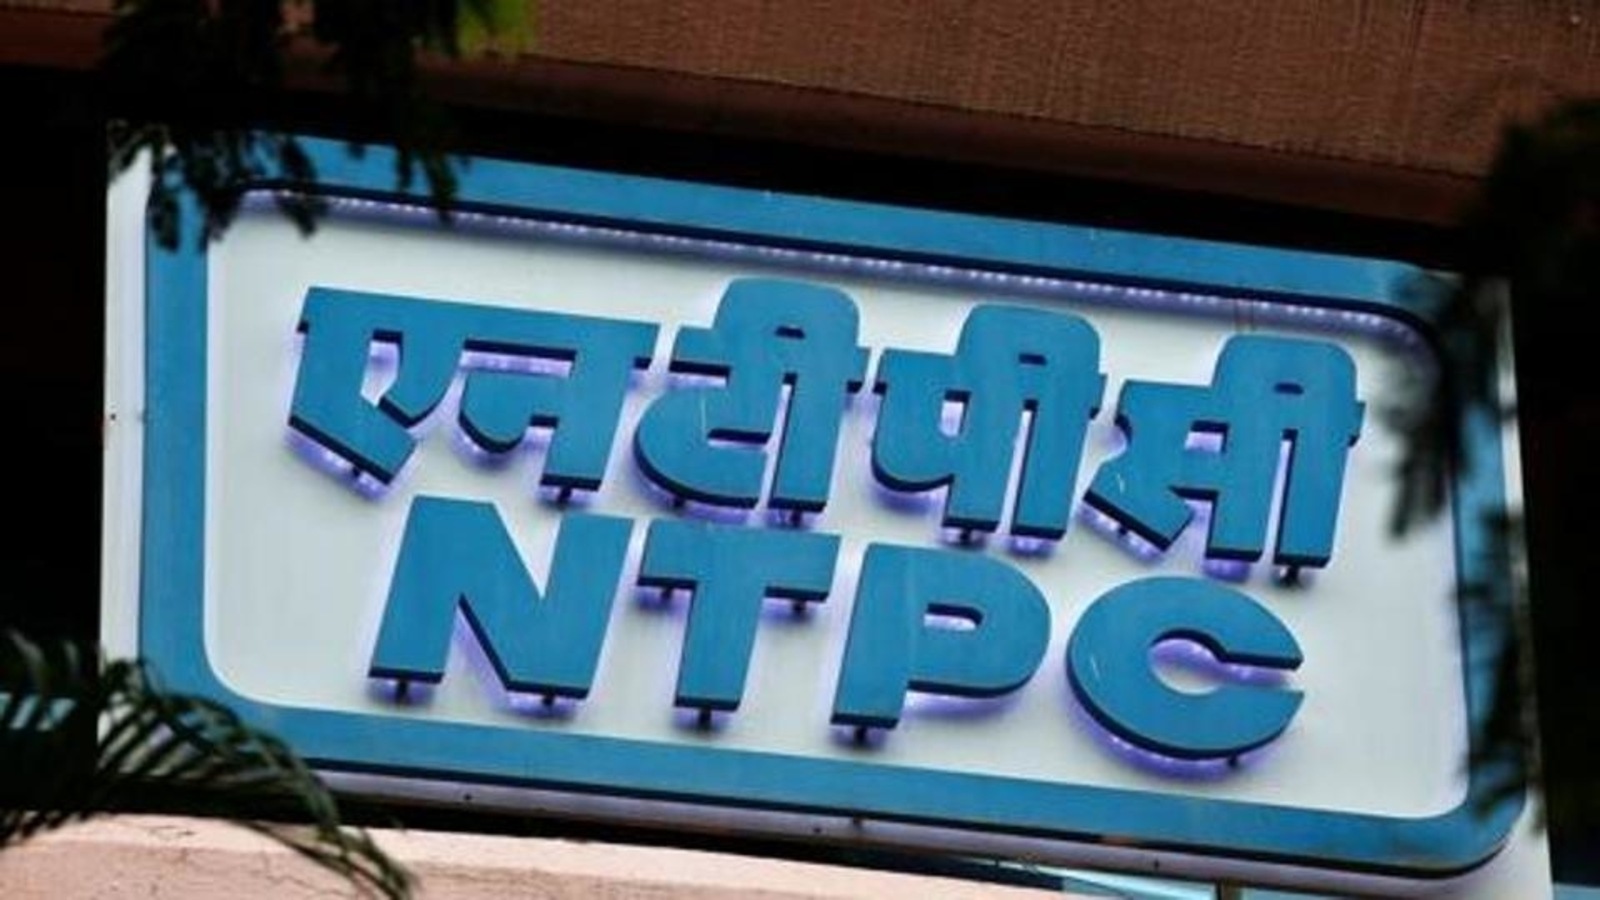 NTPC Recruitment: Last day to apply for 280 engineering executive trainees